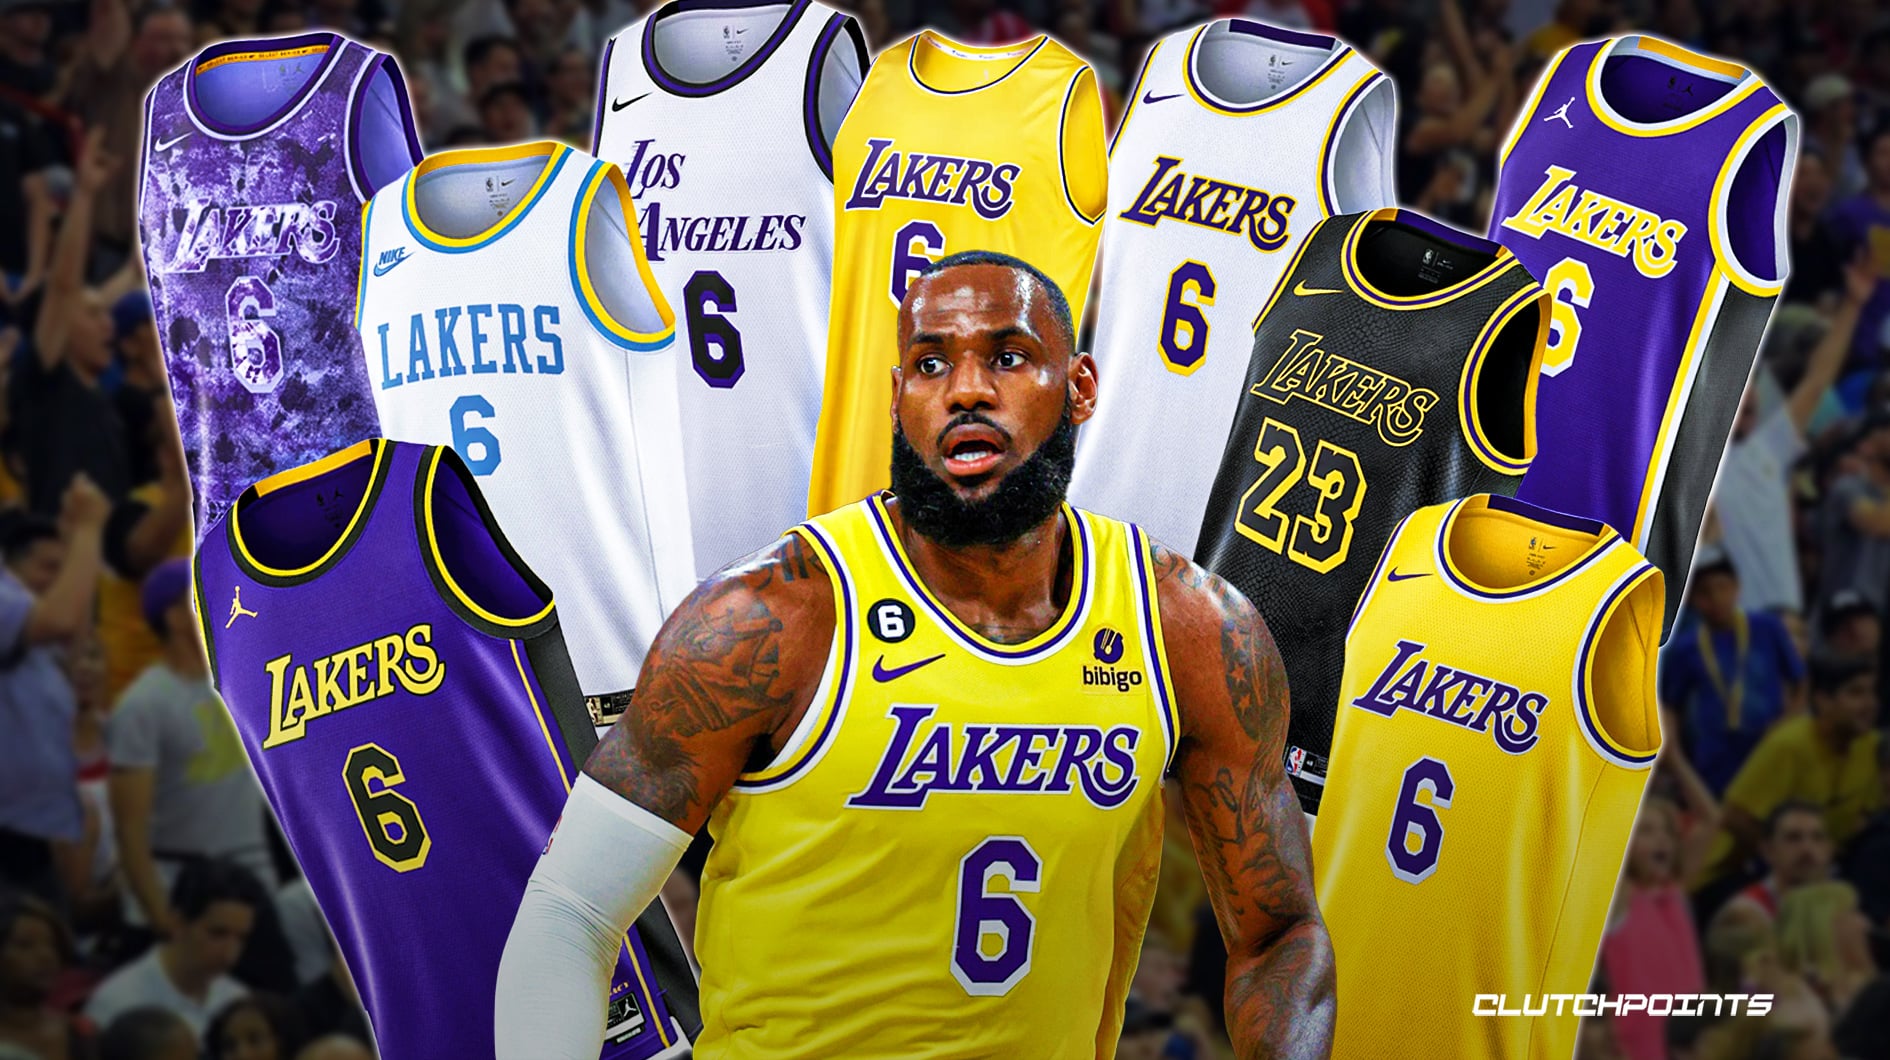 lebron james lakers official jersey